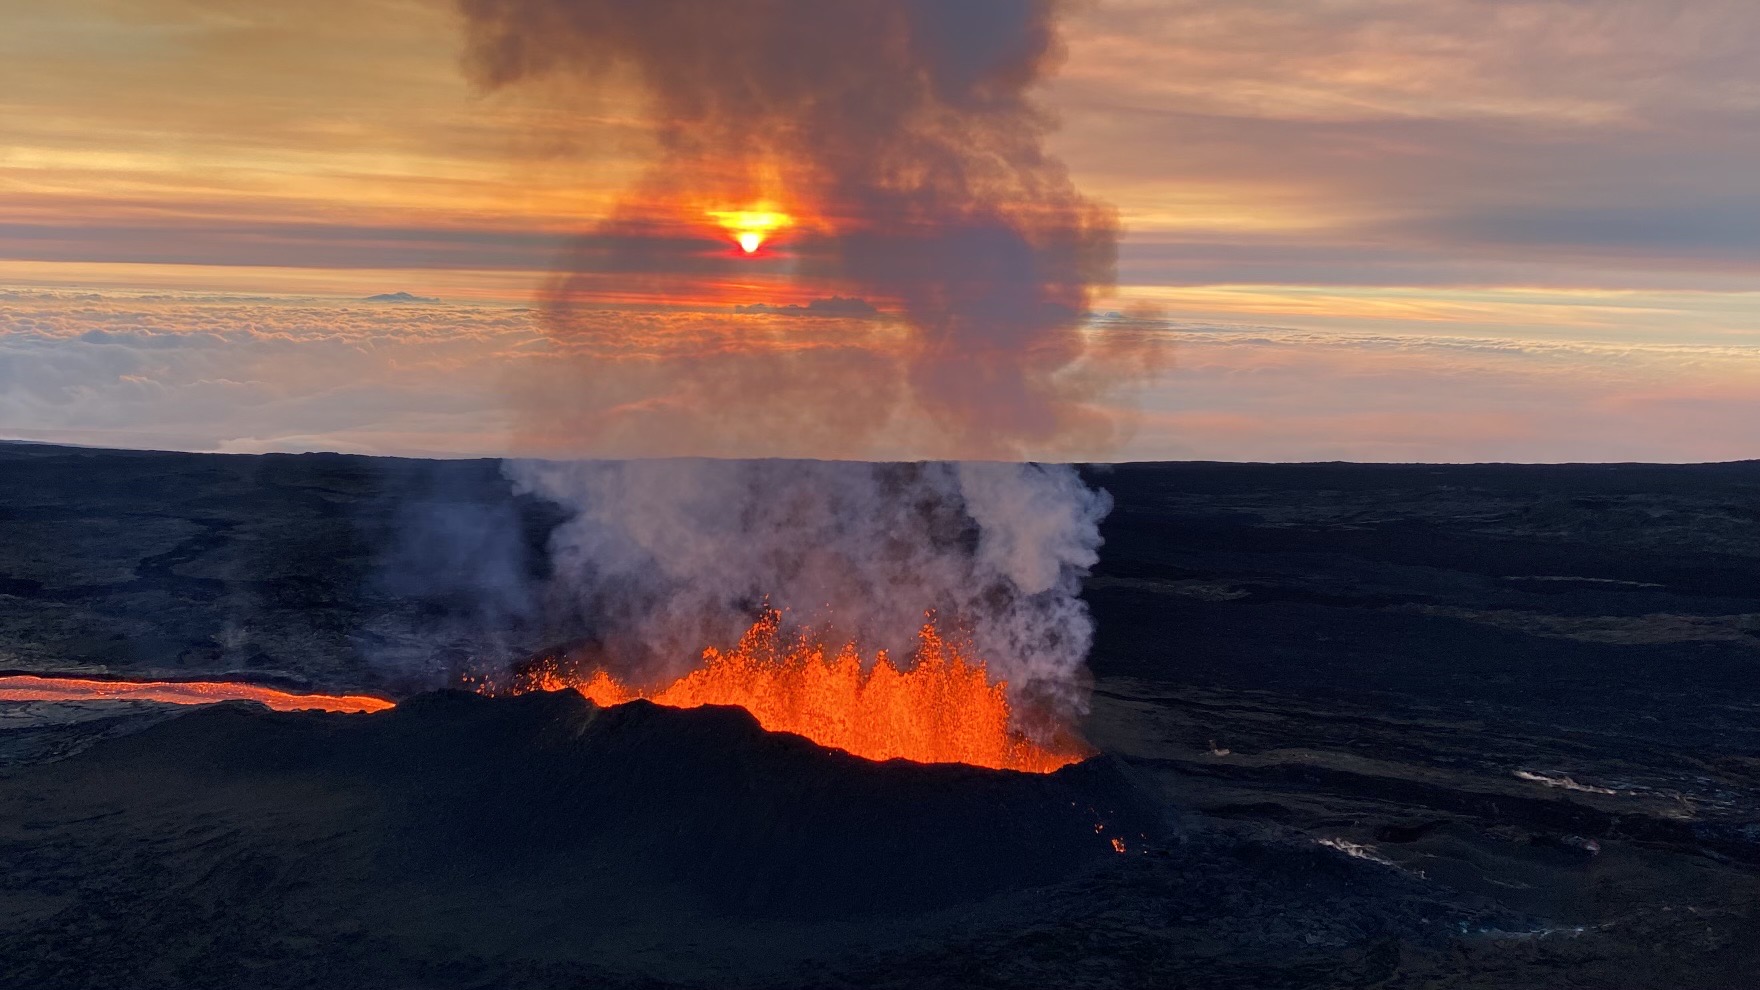 Lava flows like a river below volcano and erupts from volcano - the orange lava contrasting against the black of former flows. At sunrise.